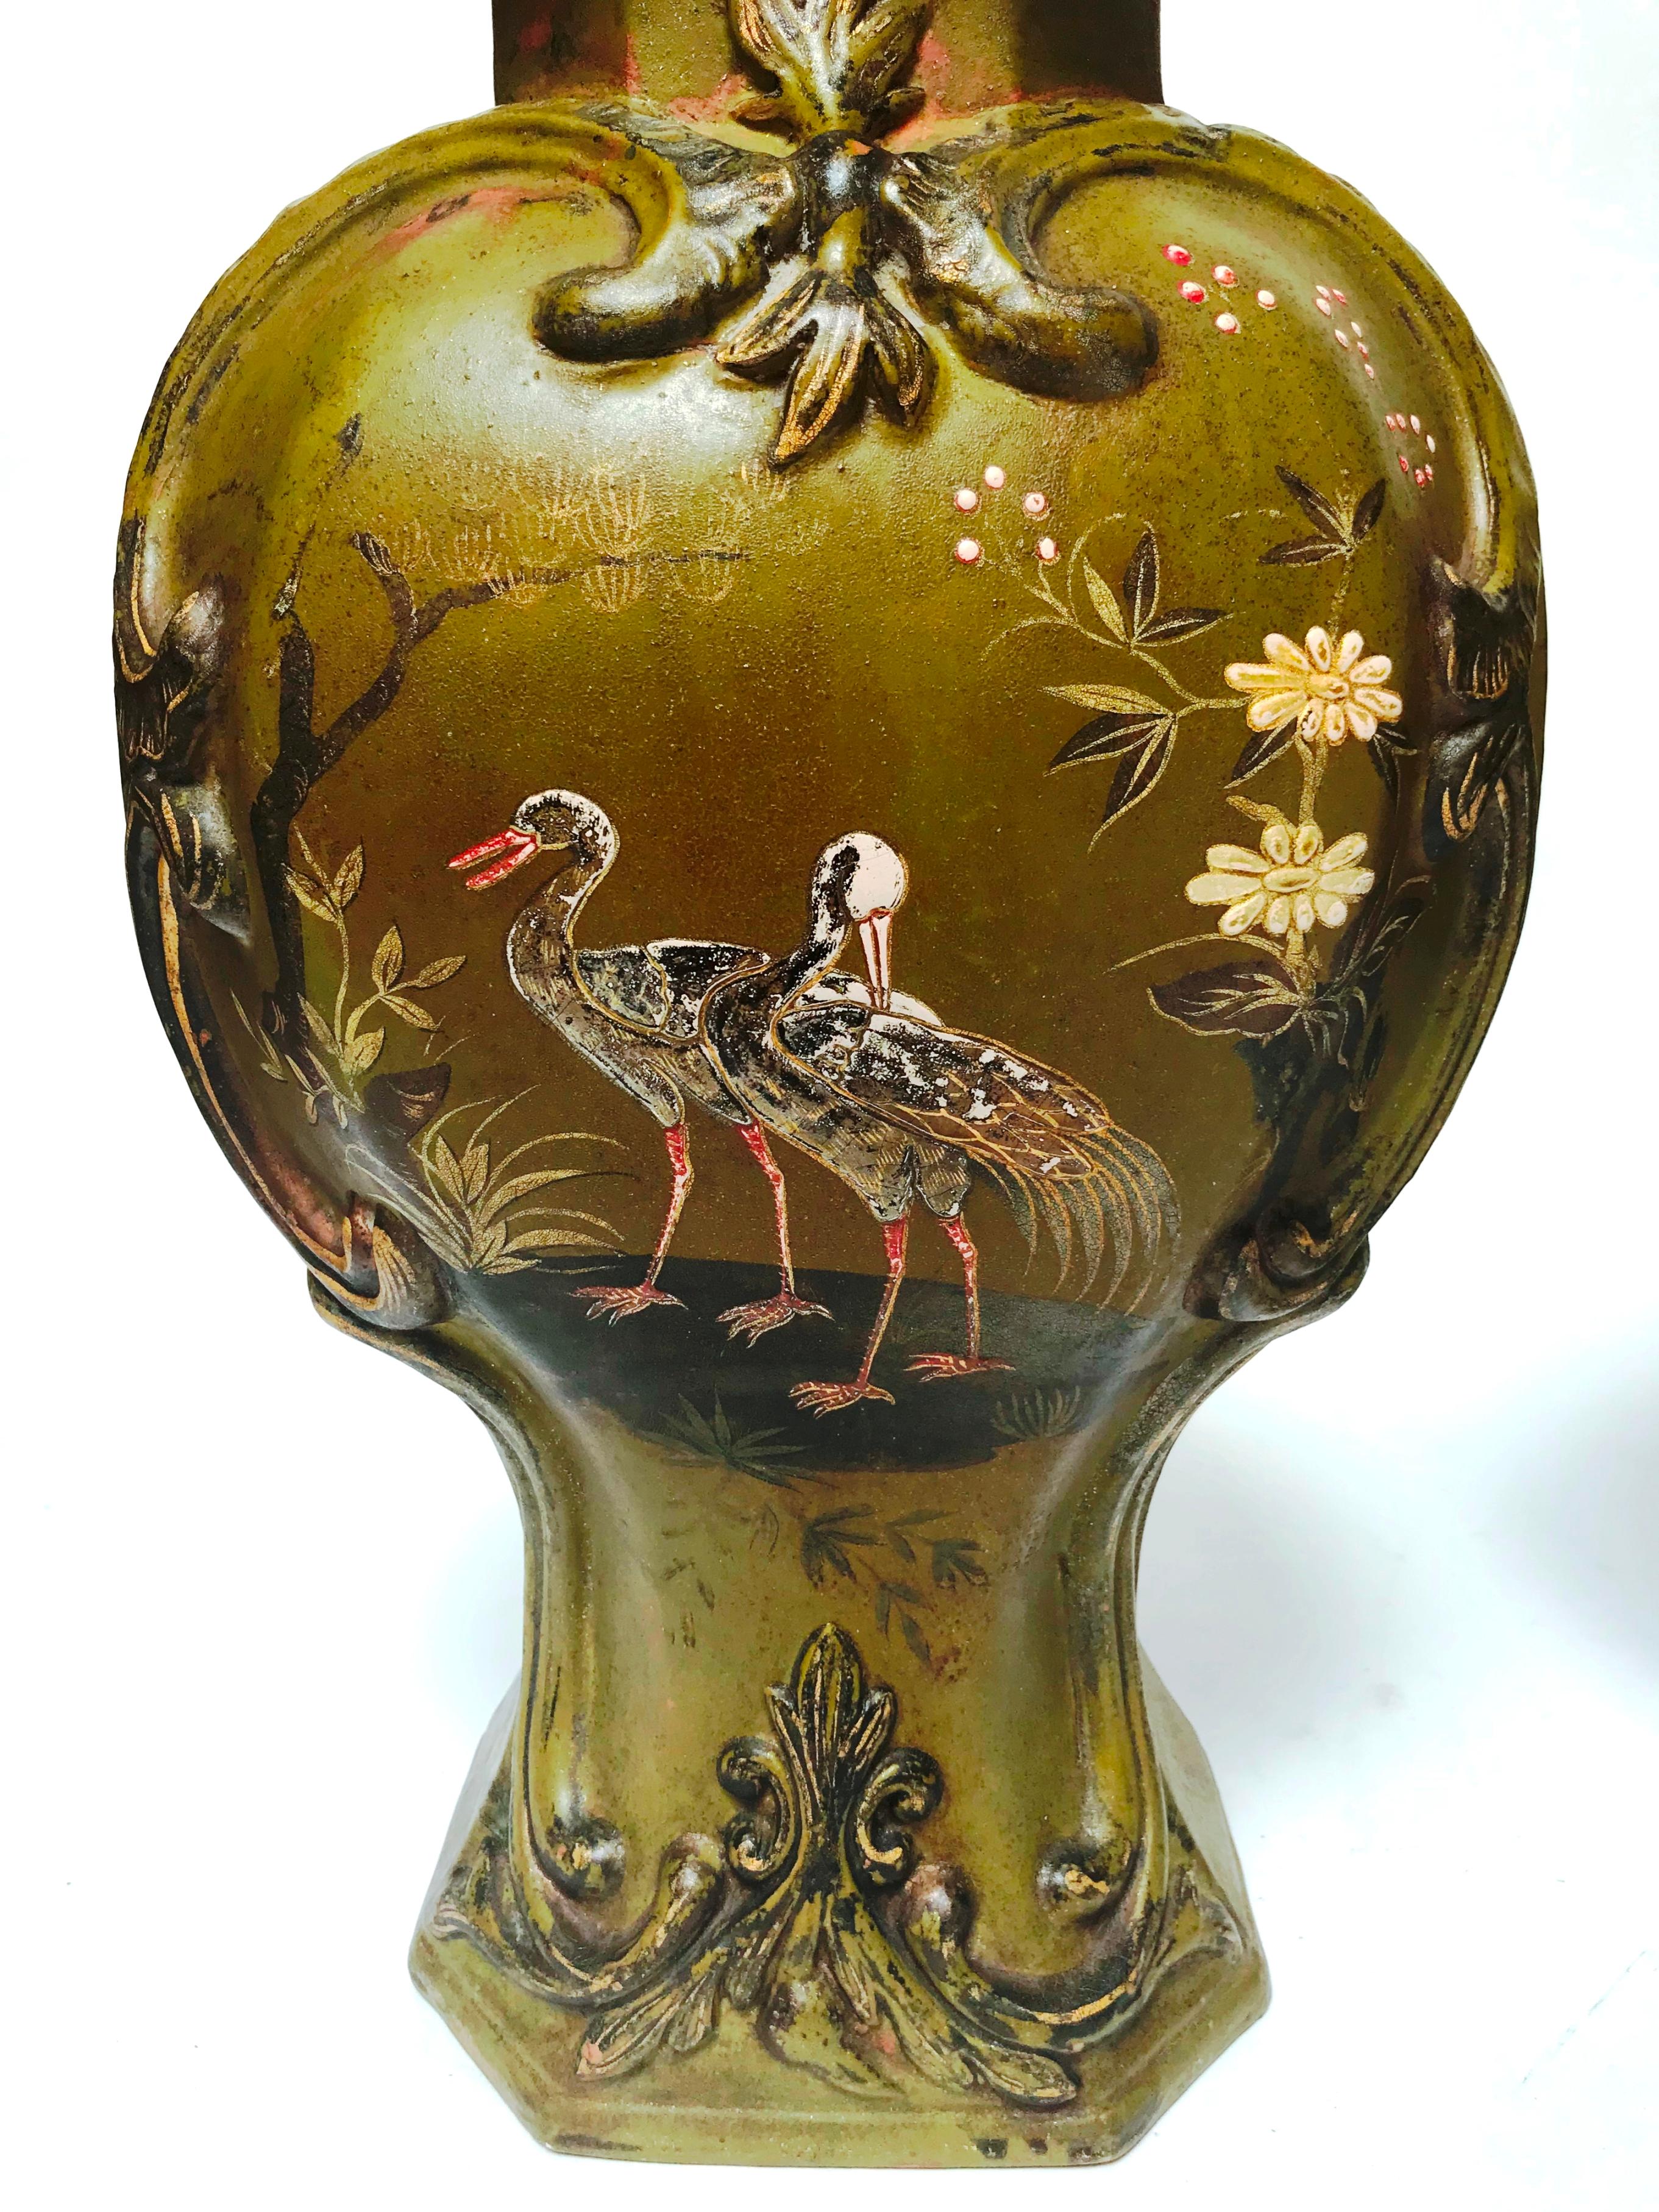 Each of baluster form, with a domed cover and
lion knop, designed in a deliberate blend of
chinoiserie: flowers and cranes and an oriental
form, and Rococo motifs: scrolled foliate forms
in raised relief, the decoration hand painted in
colored